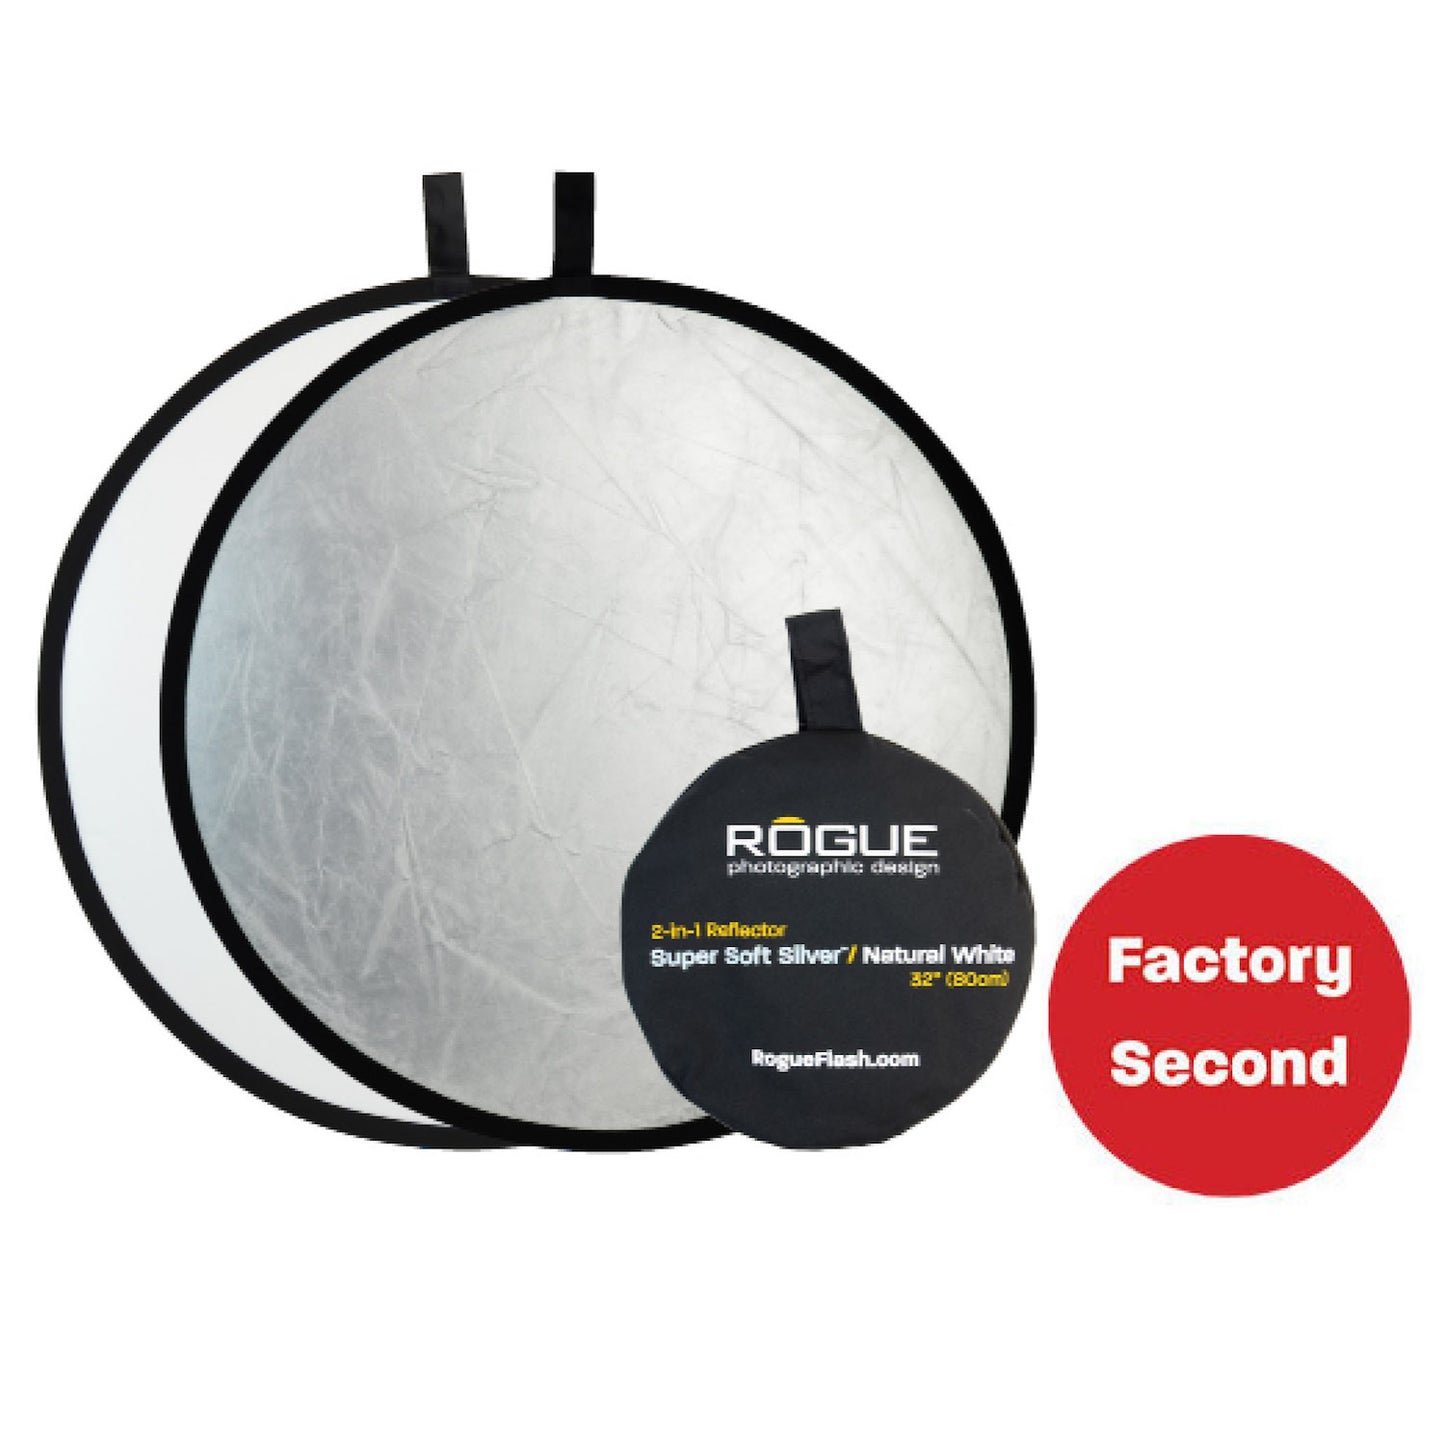 
                  
                    FACTORY SECOND:  Rogue 32” + 20x40" 2-in-1 Super Soft Silver Reflector Set
                  
                